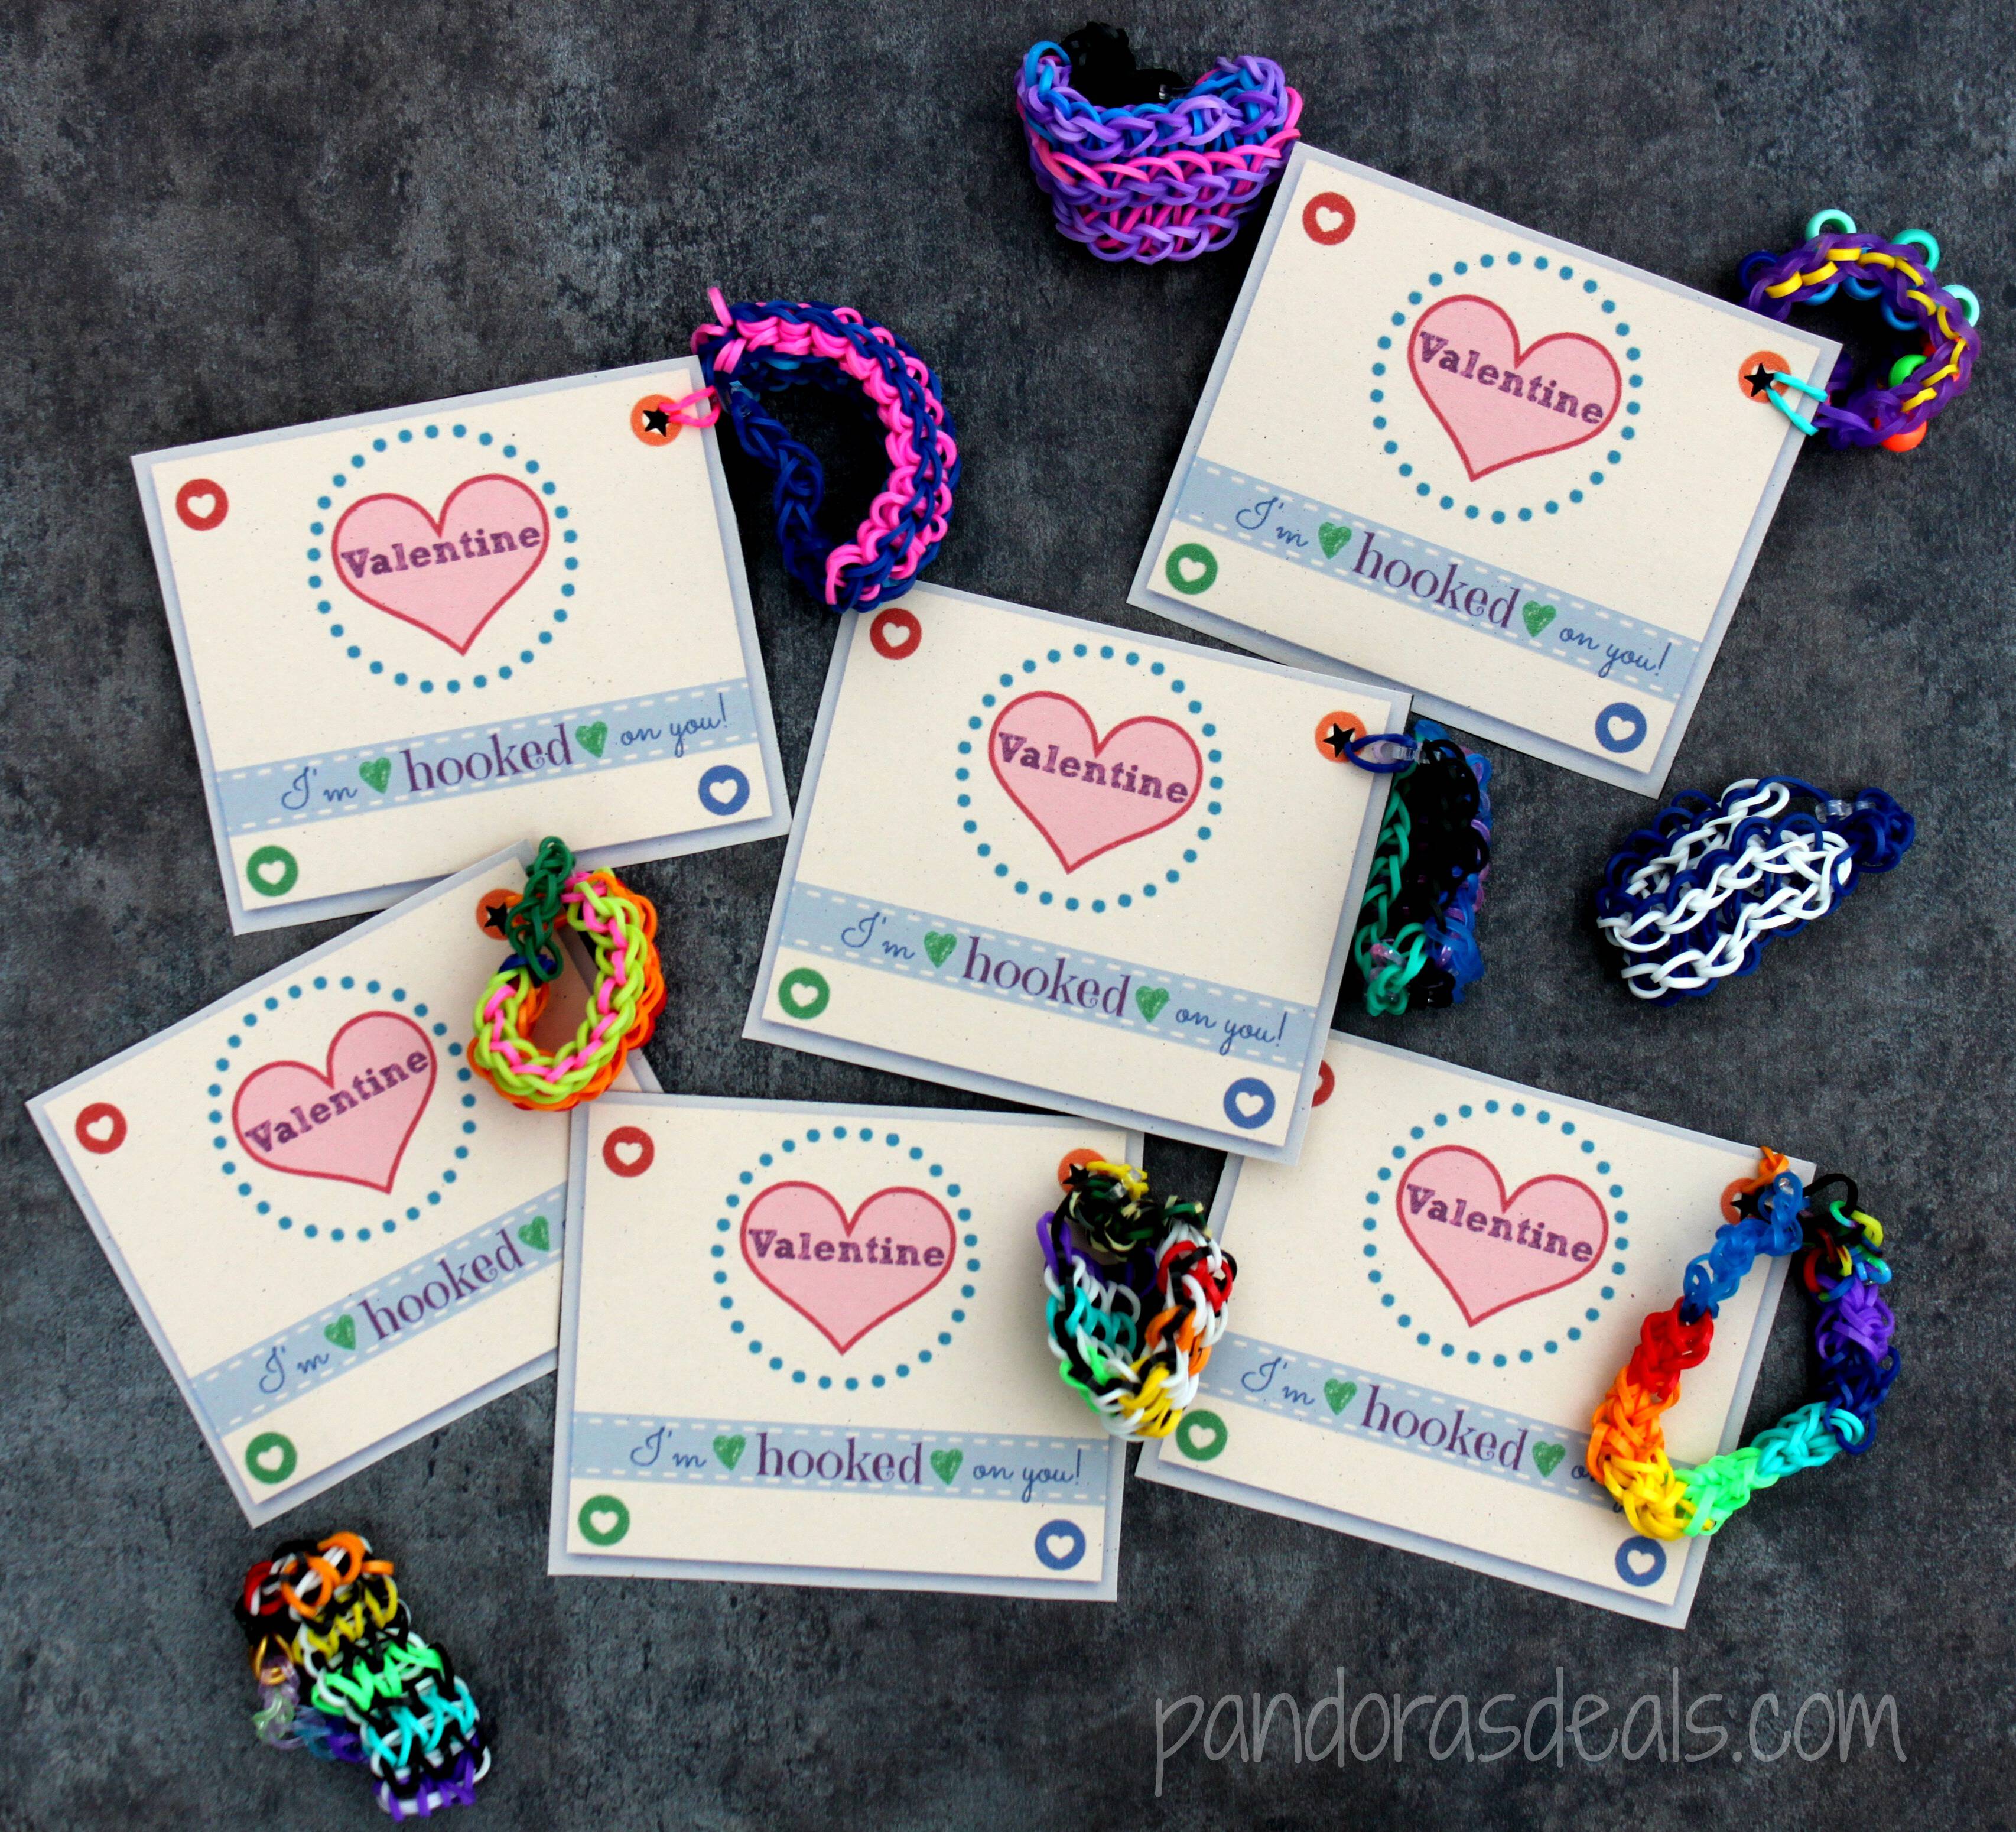 Drowning in Rainbow Loom bracelets? These DIY Valentine's Day cards are the perfect craft for kids. Use my free printable to make Rainbow Loom Valentine's Day Cards for all of your kids' friends!